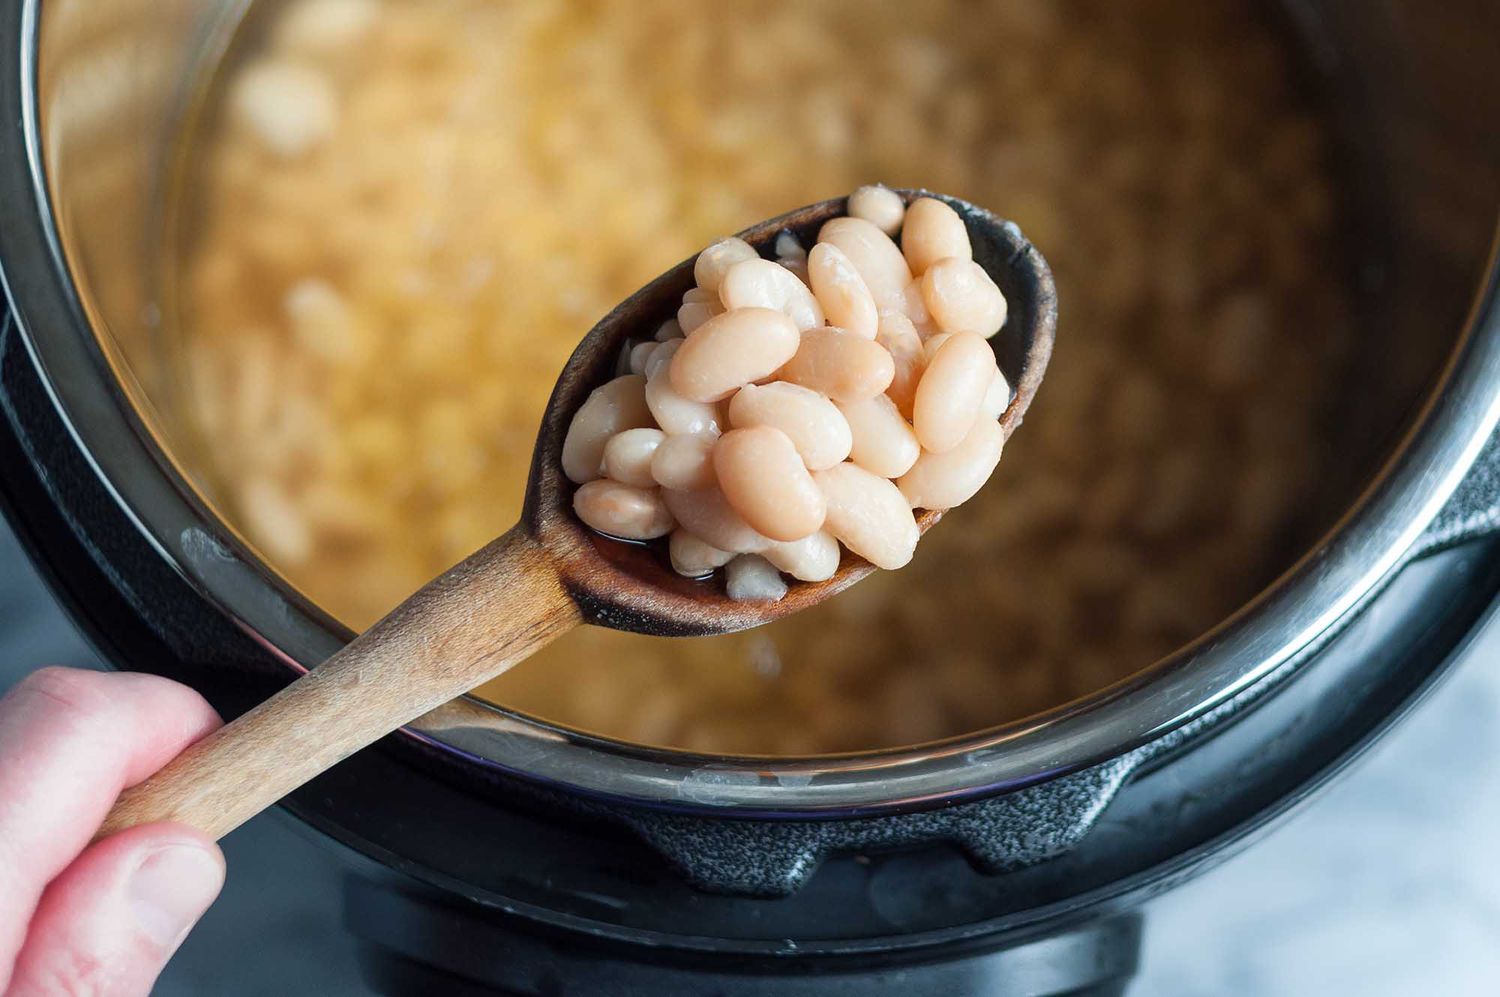 Family FECS: Use pressure cooker for cooking meat and beans